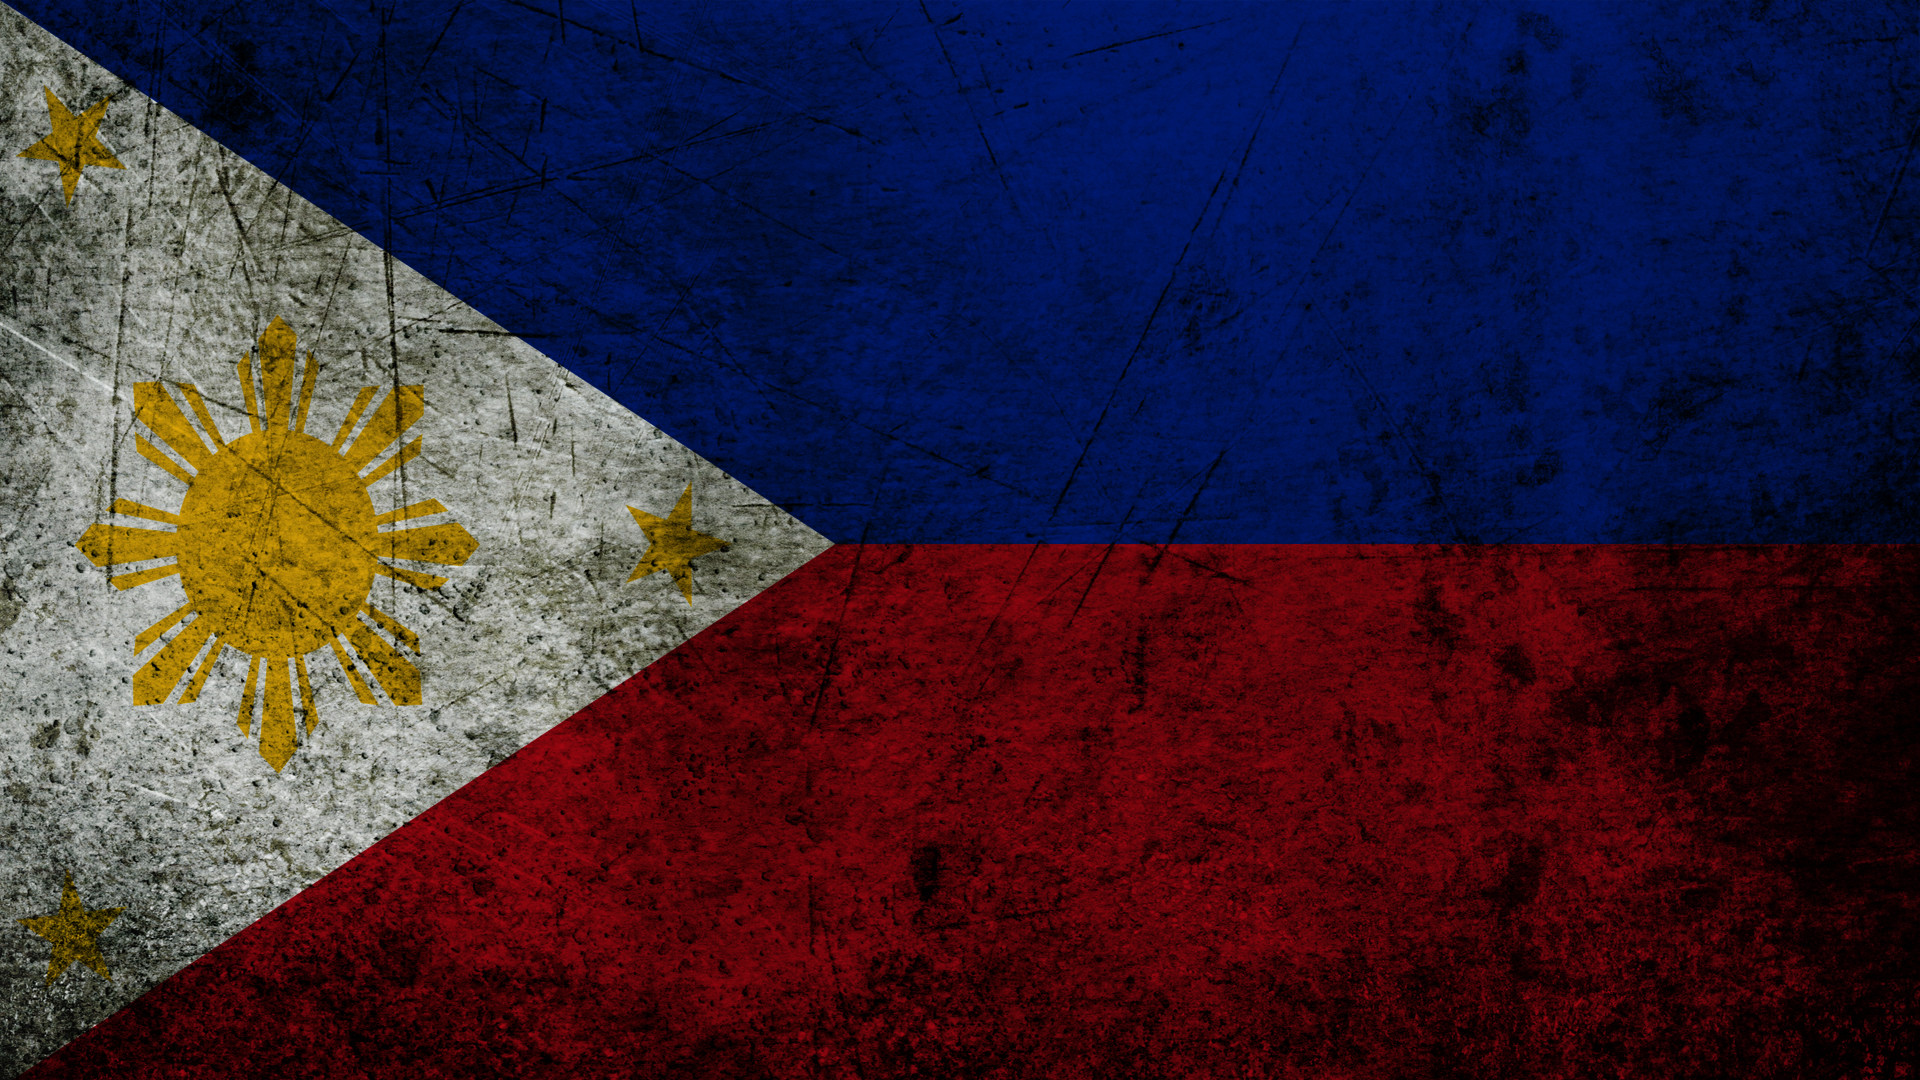 1920x1080 Flag Of The Philippines HD Wallpaper | Hintergrund |  | ID:724072  - Wallpaper Abyss